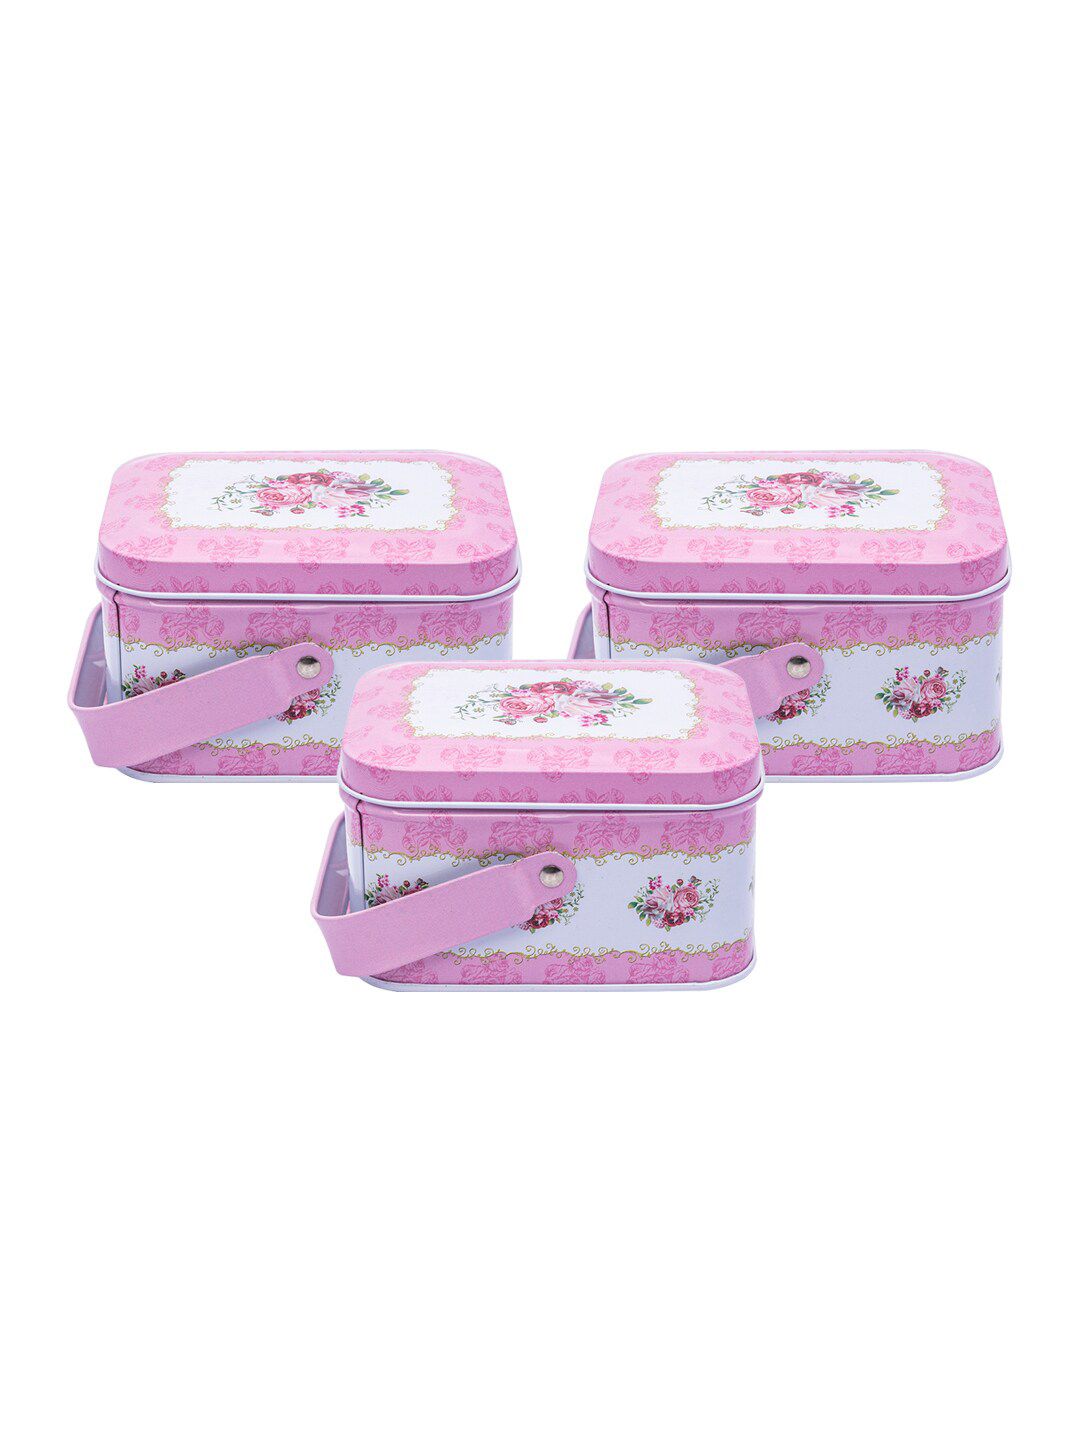 MARKET99 Set Of 3 Pink & White Printed Food Containers Price in India